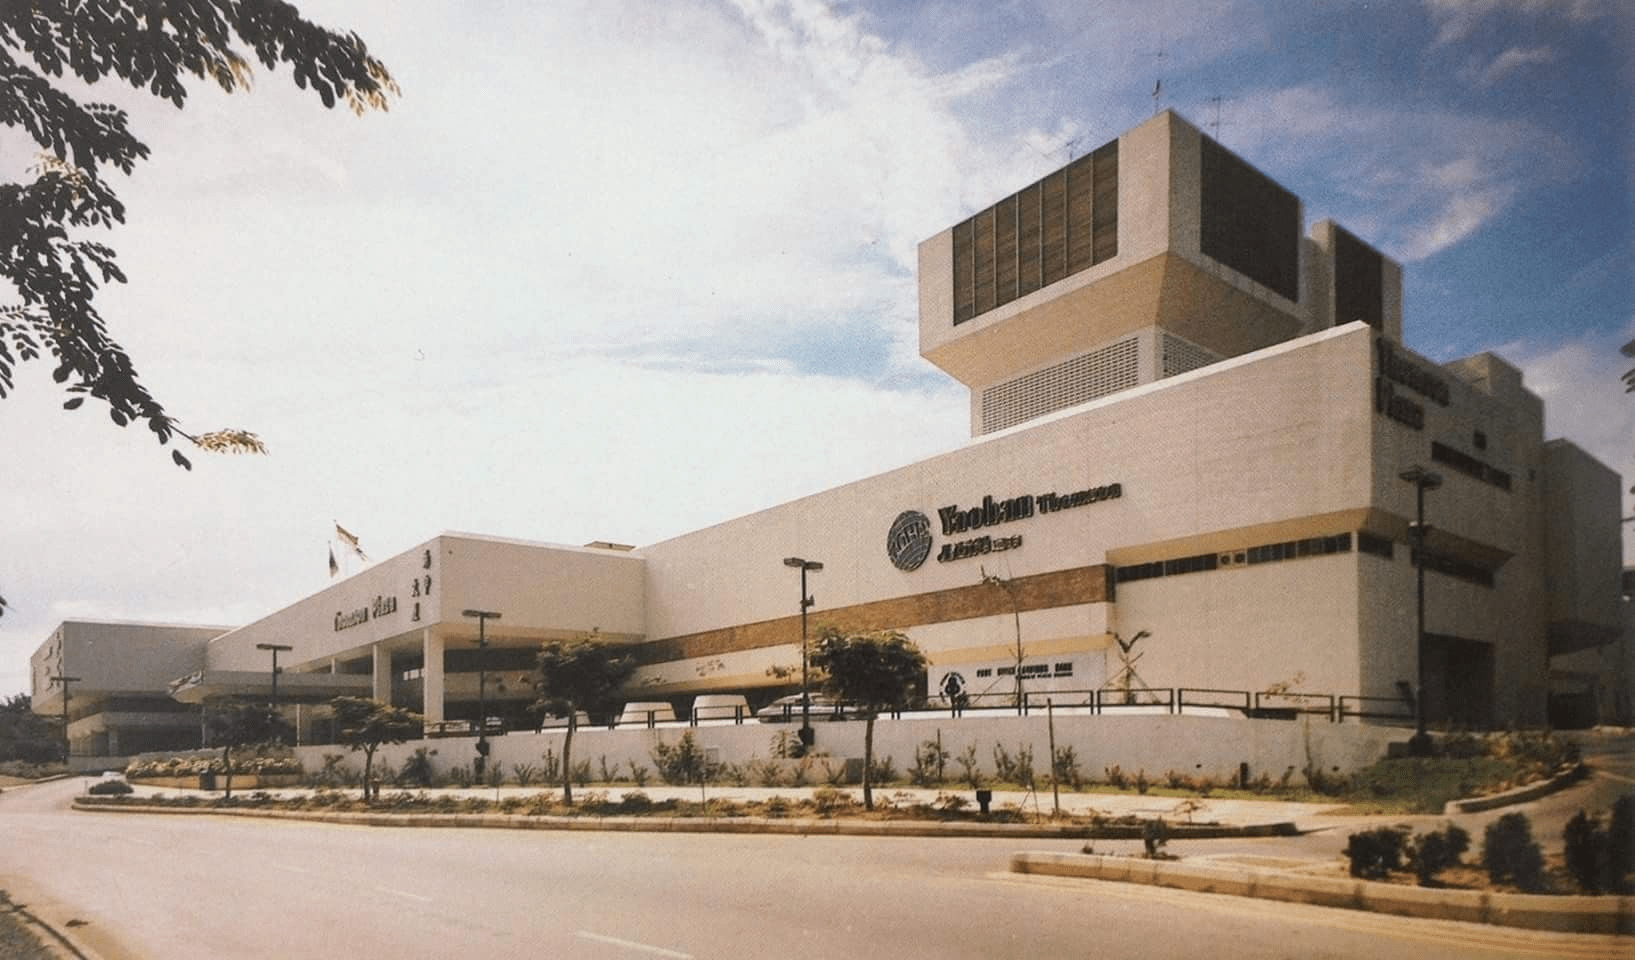 Thomson Plaza exterior in the past - heartland malls in Singapore